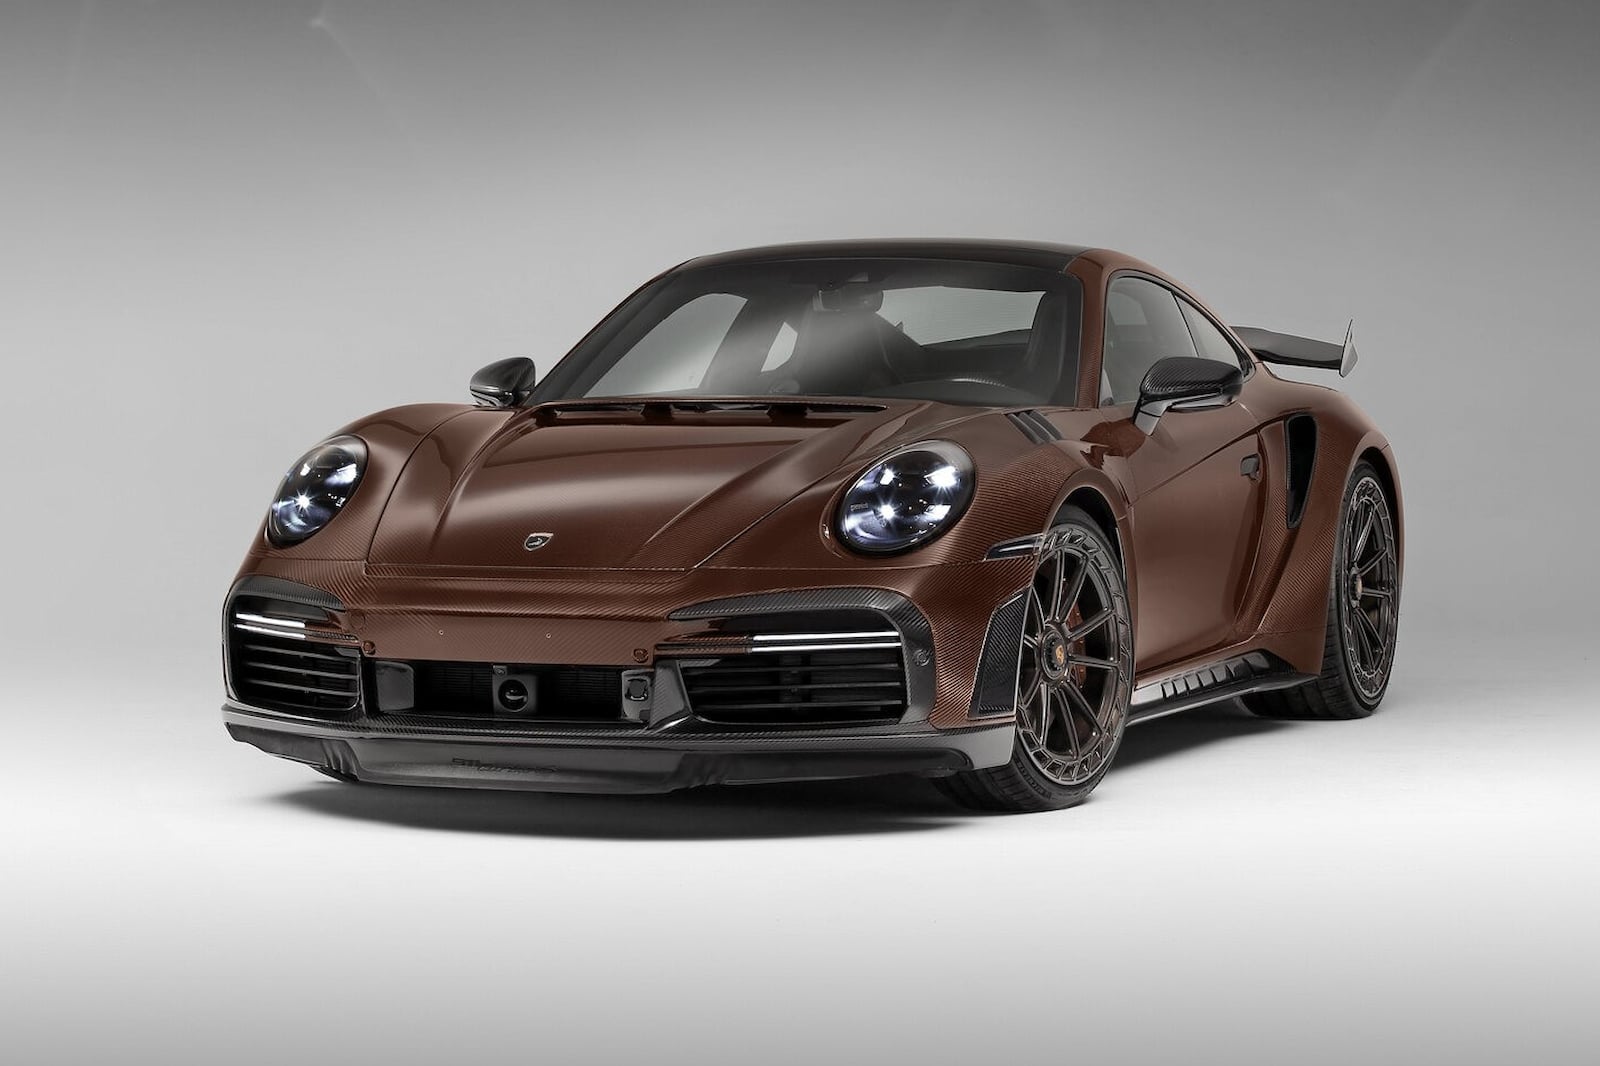 photo of Porsche 911 Turbo S Covered In Chocolate Carbon Looks Good Enough To Eat image